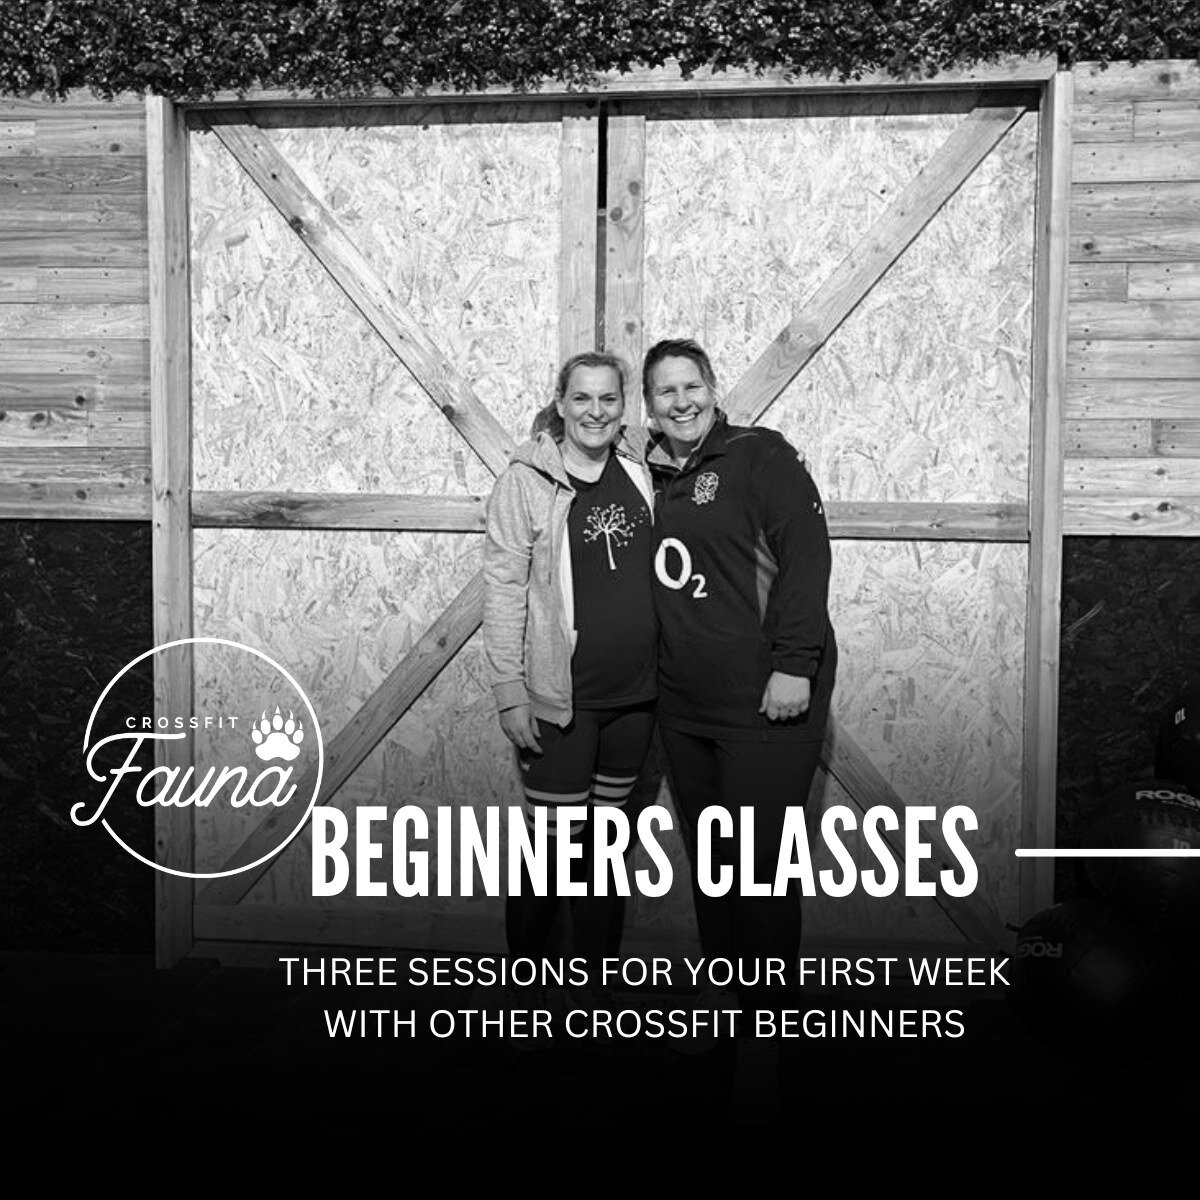 Our Beginners classes are designed for people who haven't had any experience in CrossFit before. 

Some weeks there might be one, two, or six beginners in our classes. We build your confidence and you'll find support among people who are in the exact